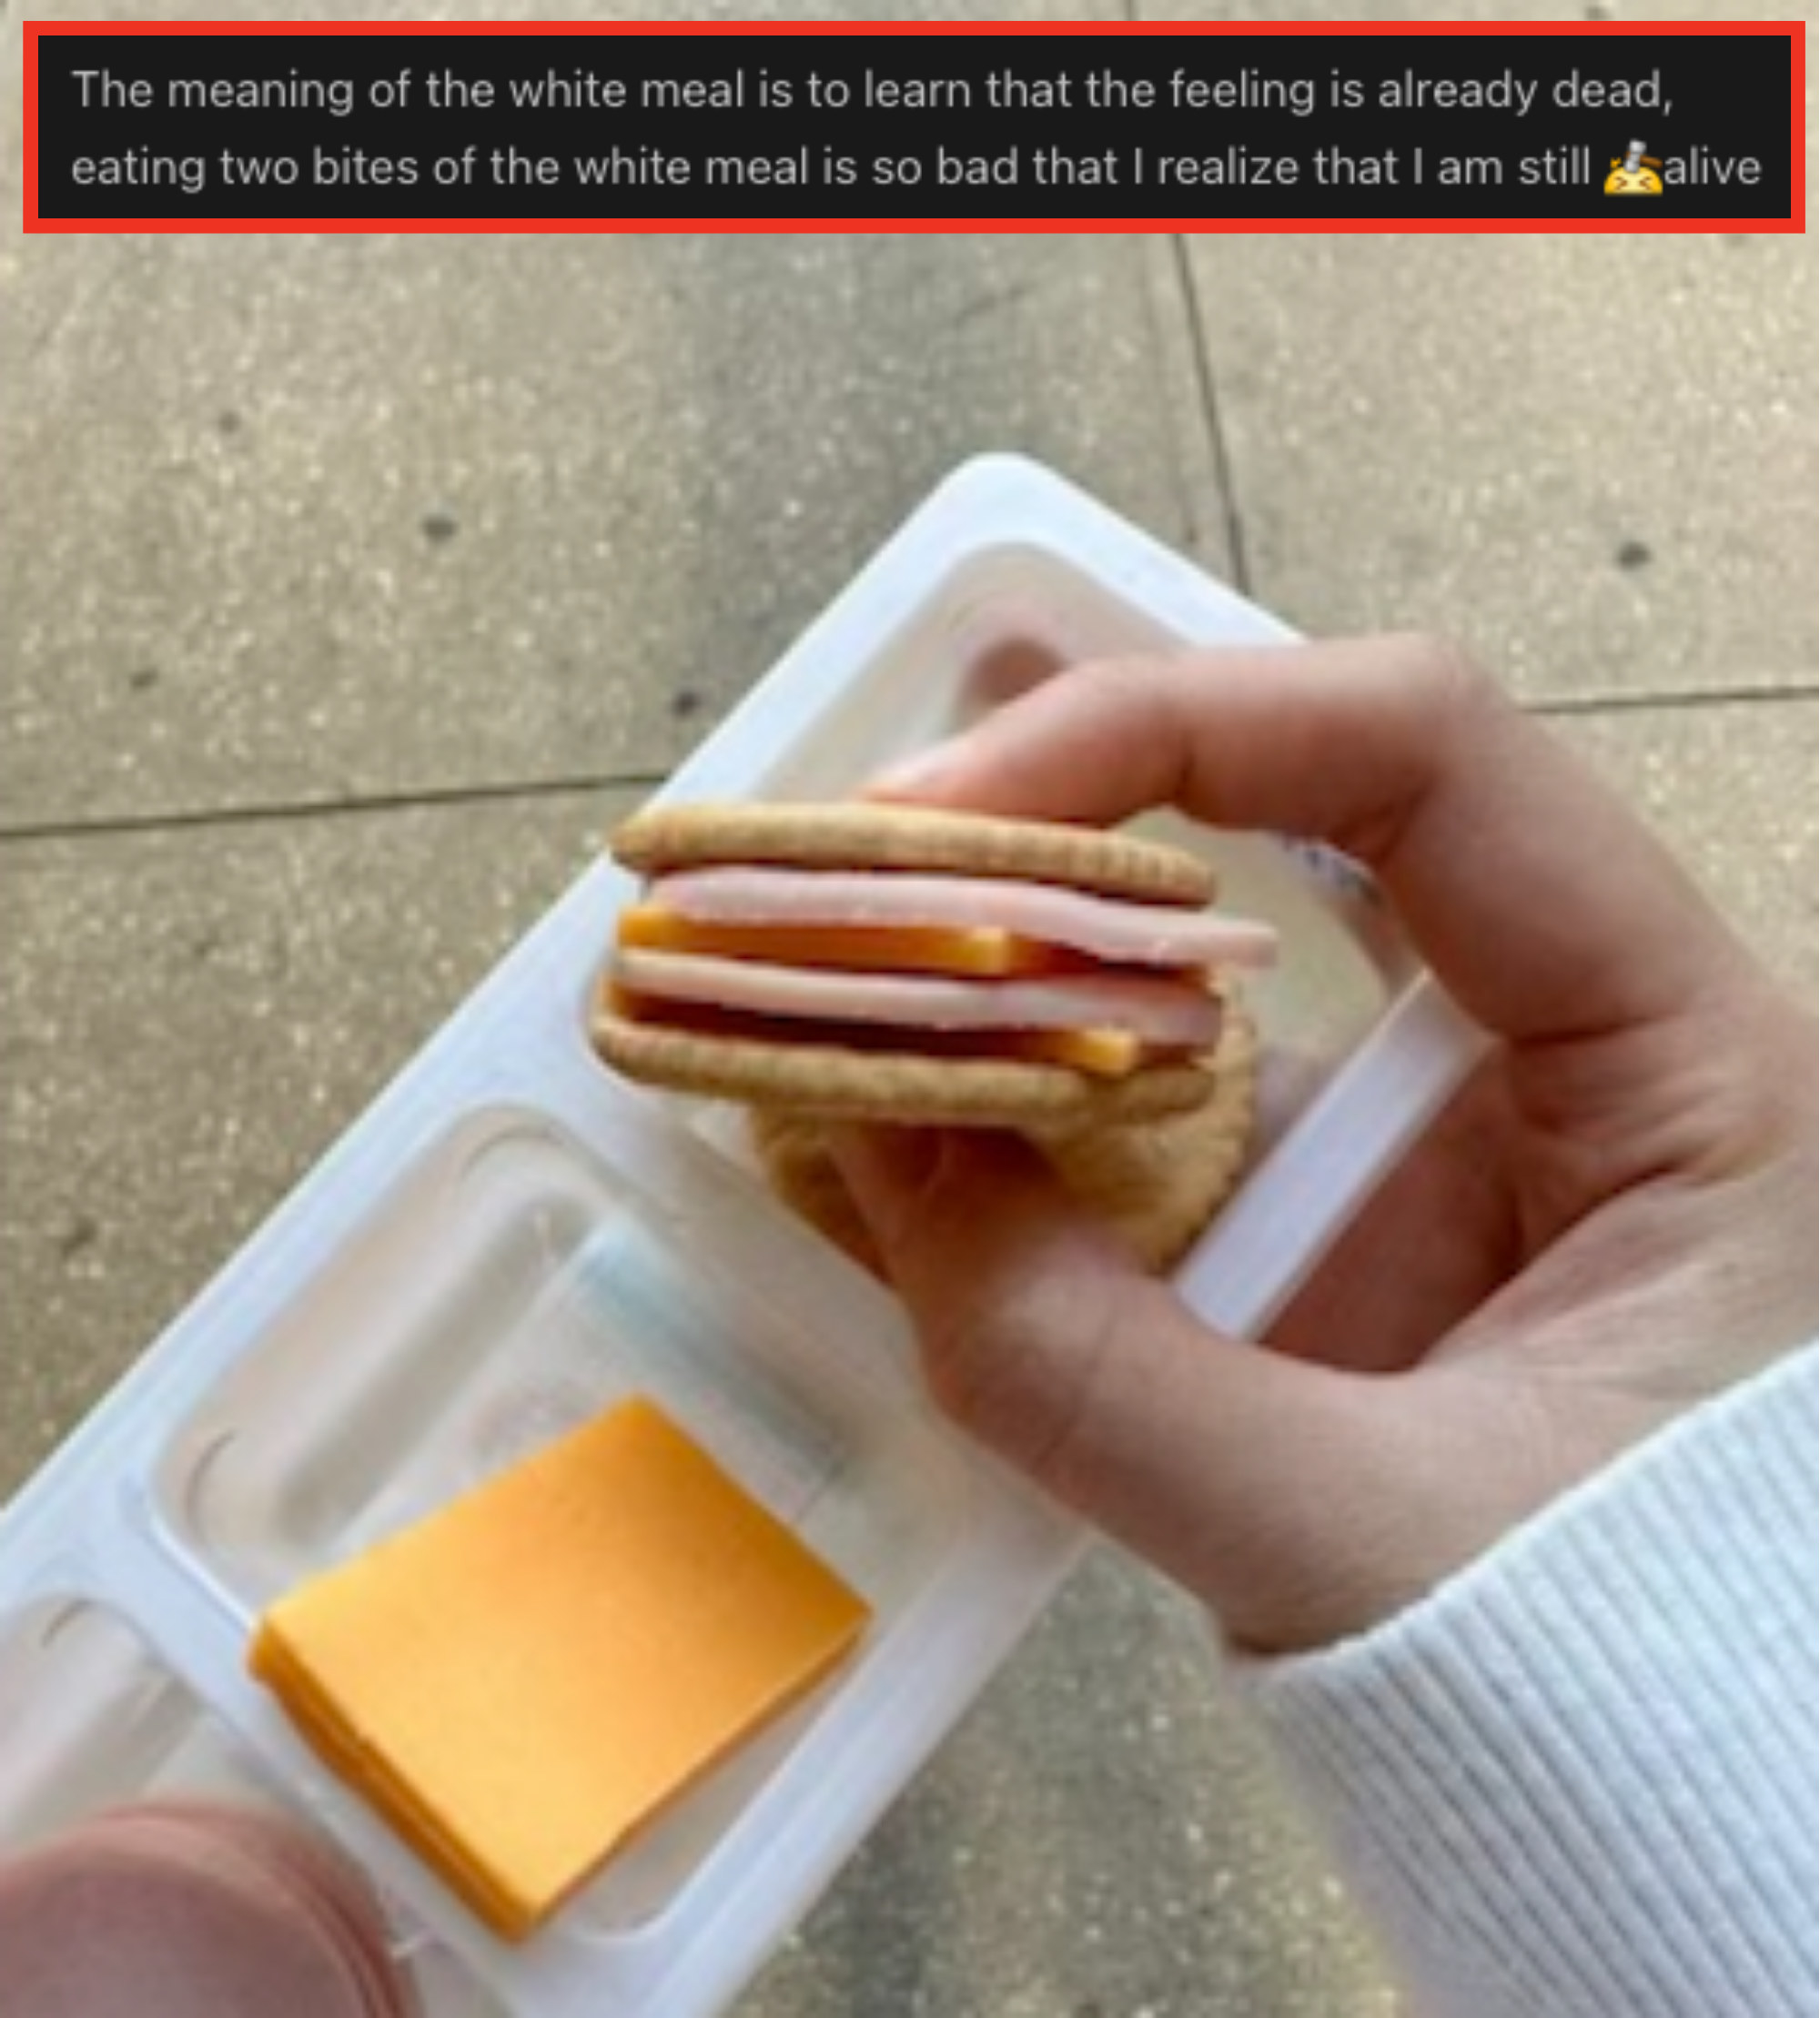 comment overlayed on top of an image of someone eating a Lunchable